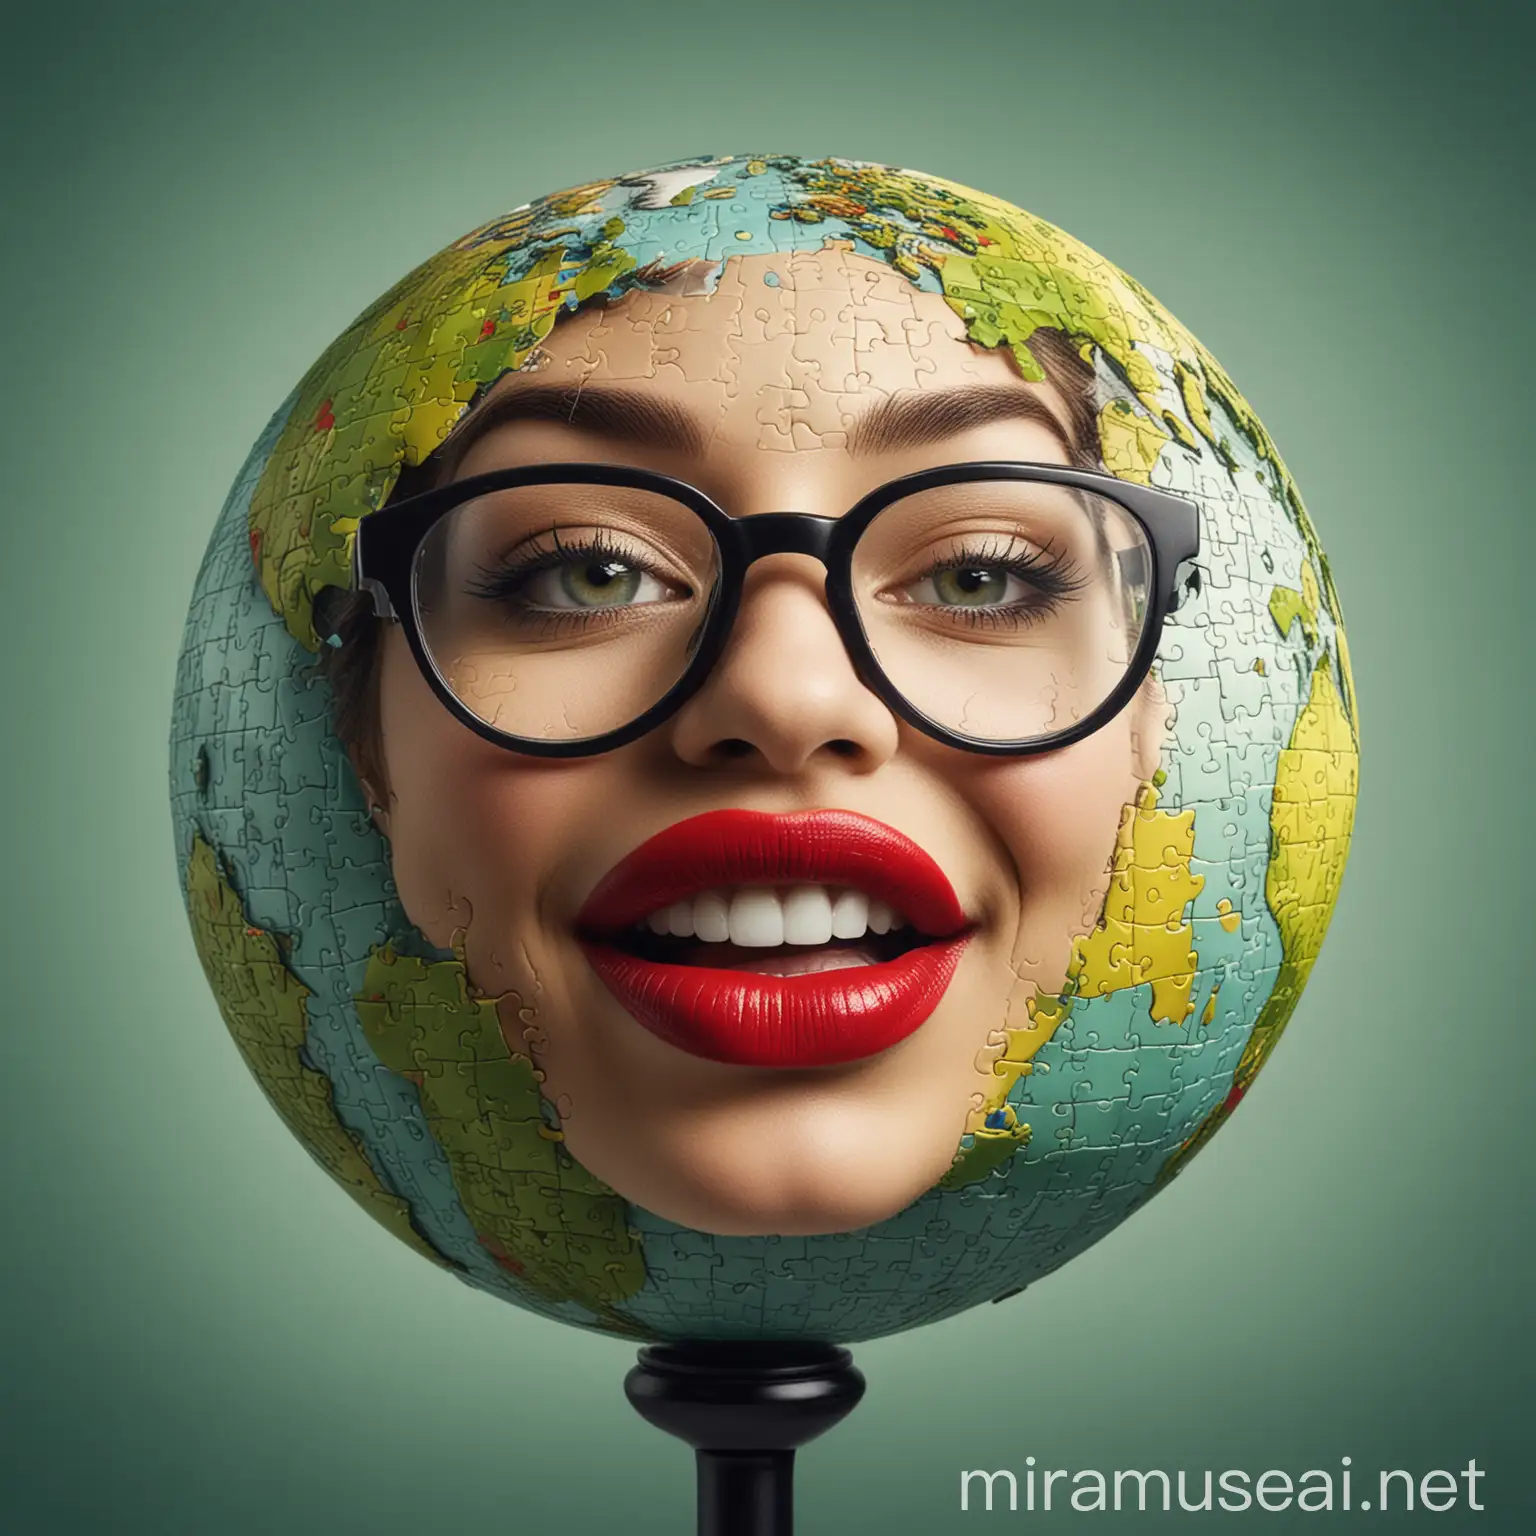 Stylized Globe with Curiosity Symbols Green and Blue Glasses and a Playful Big Mouth